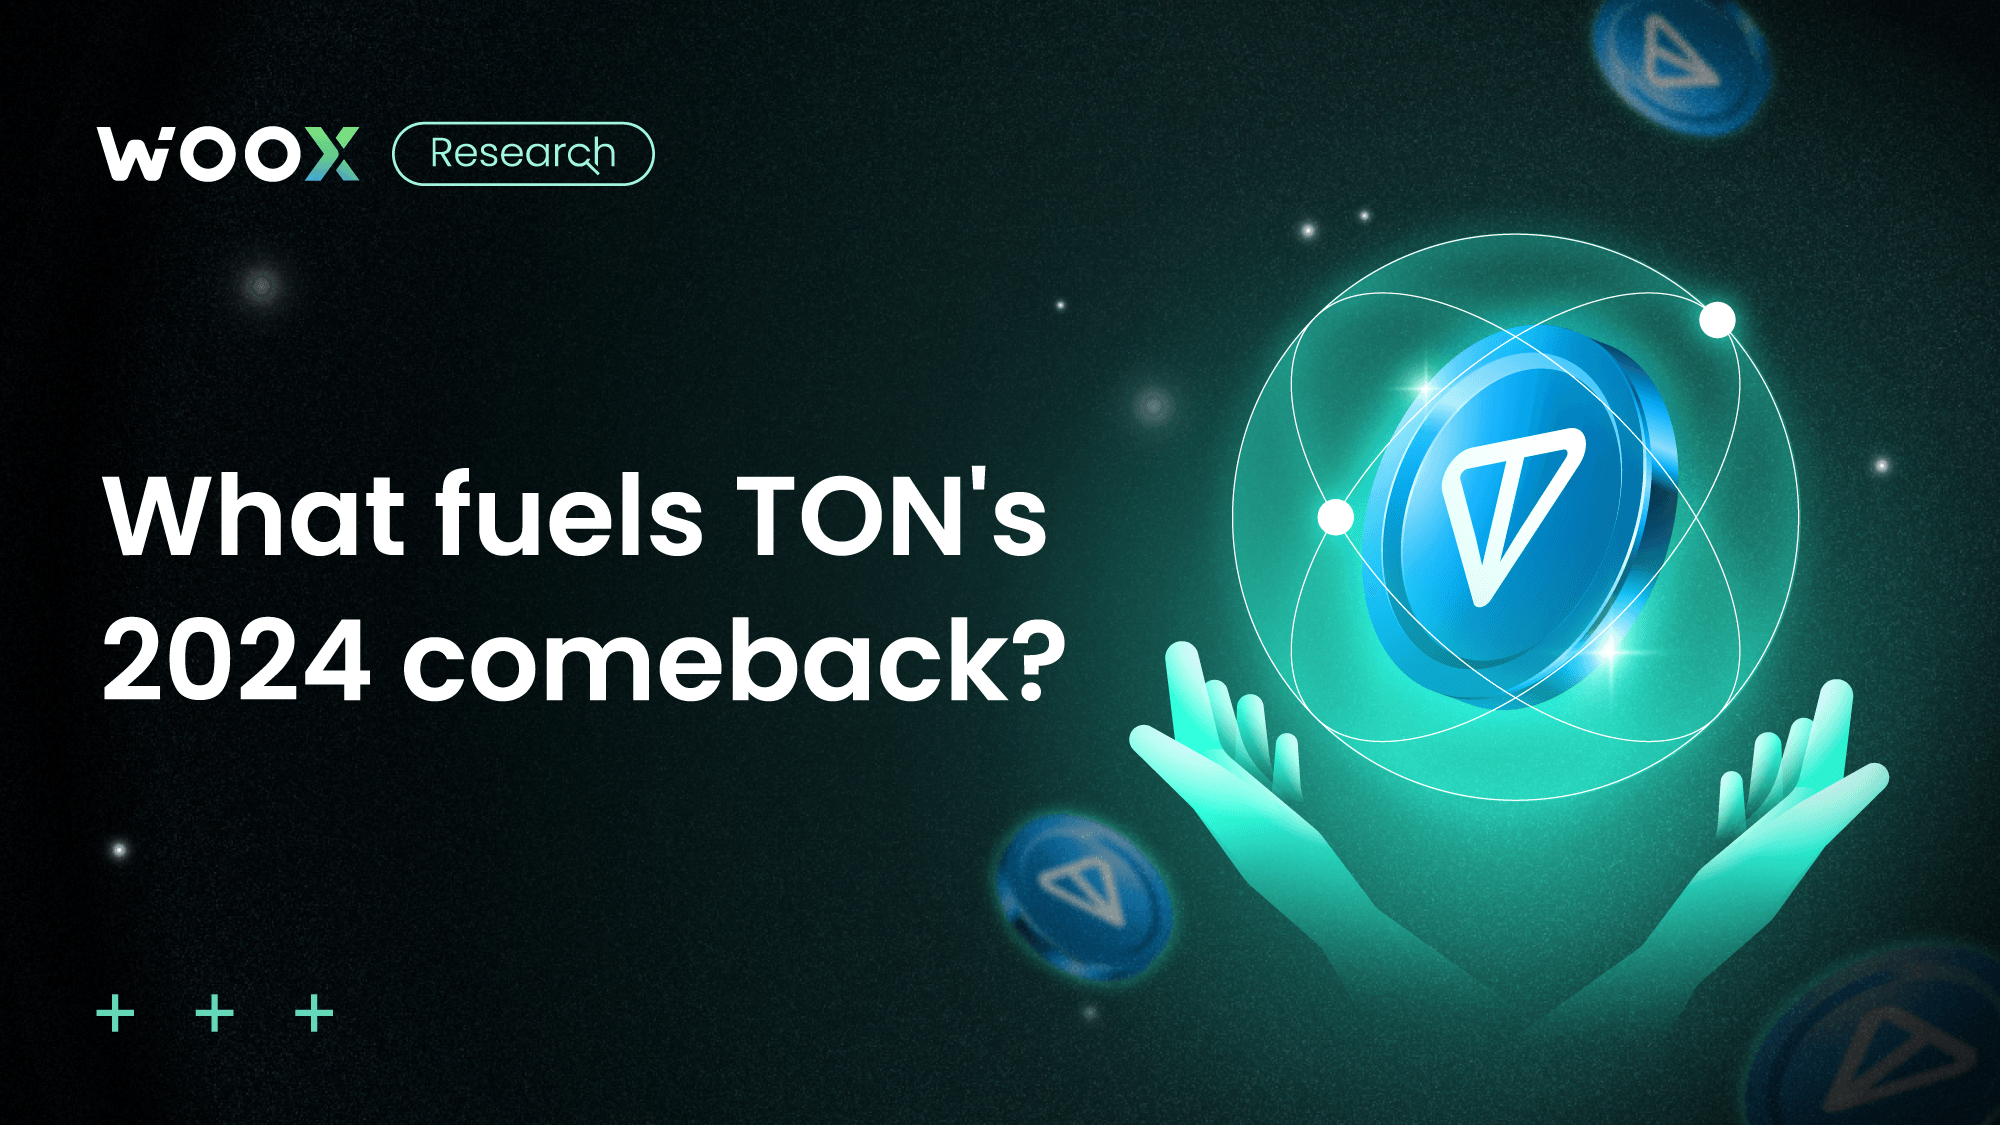 What is fueling TON’s 2024 comeback?